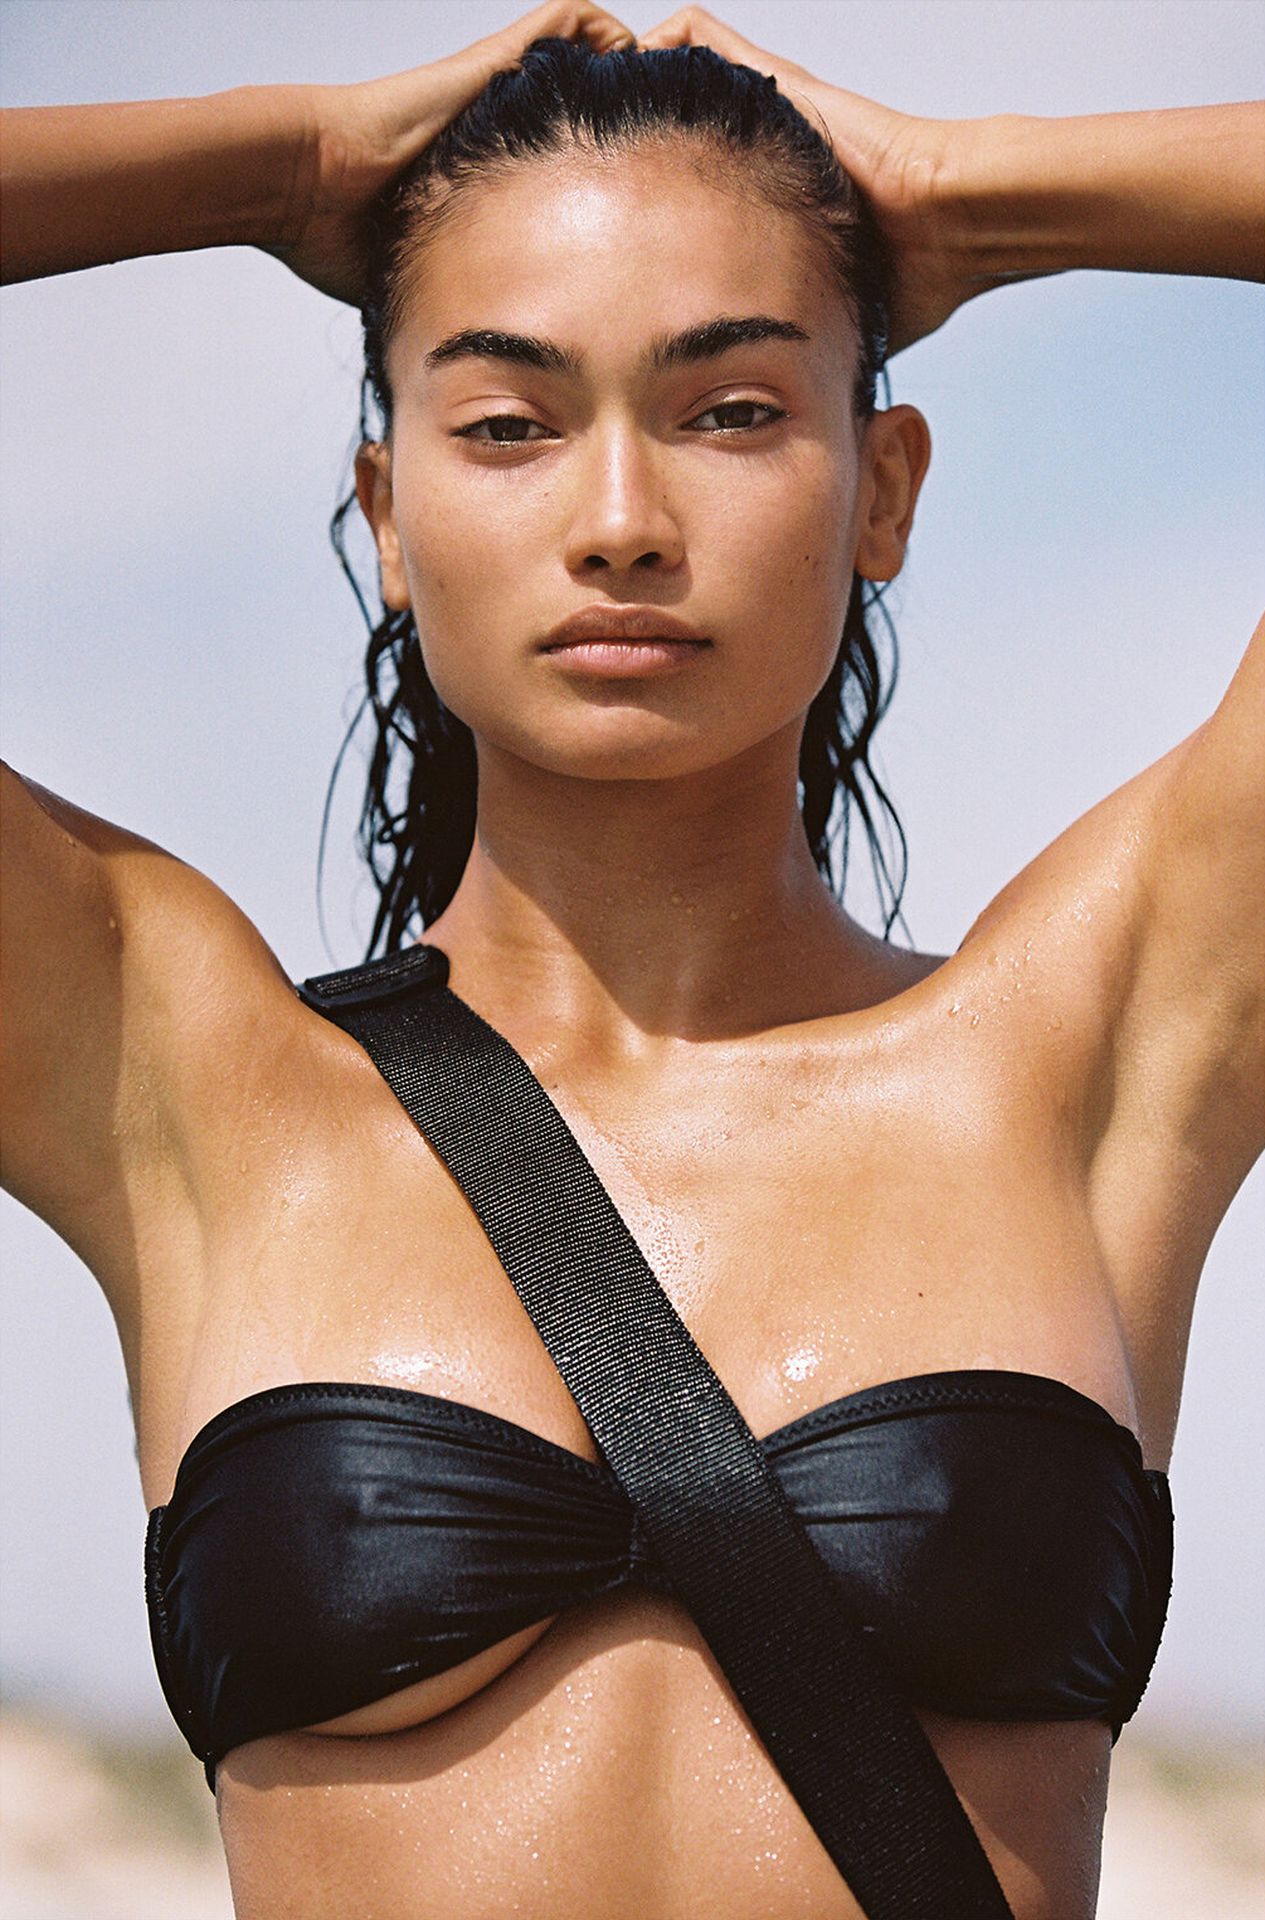 Kelly Gale’s Tits & Ass 0021